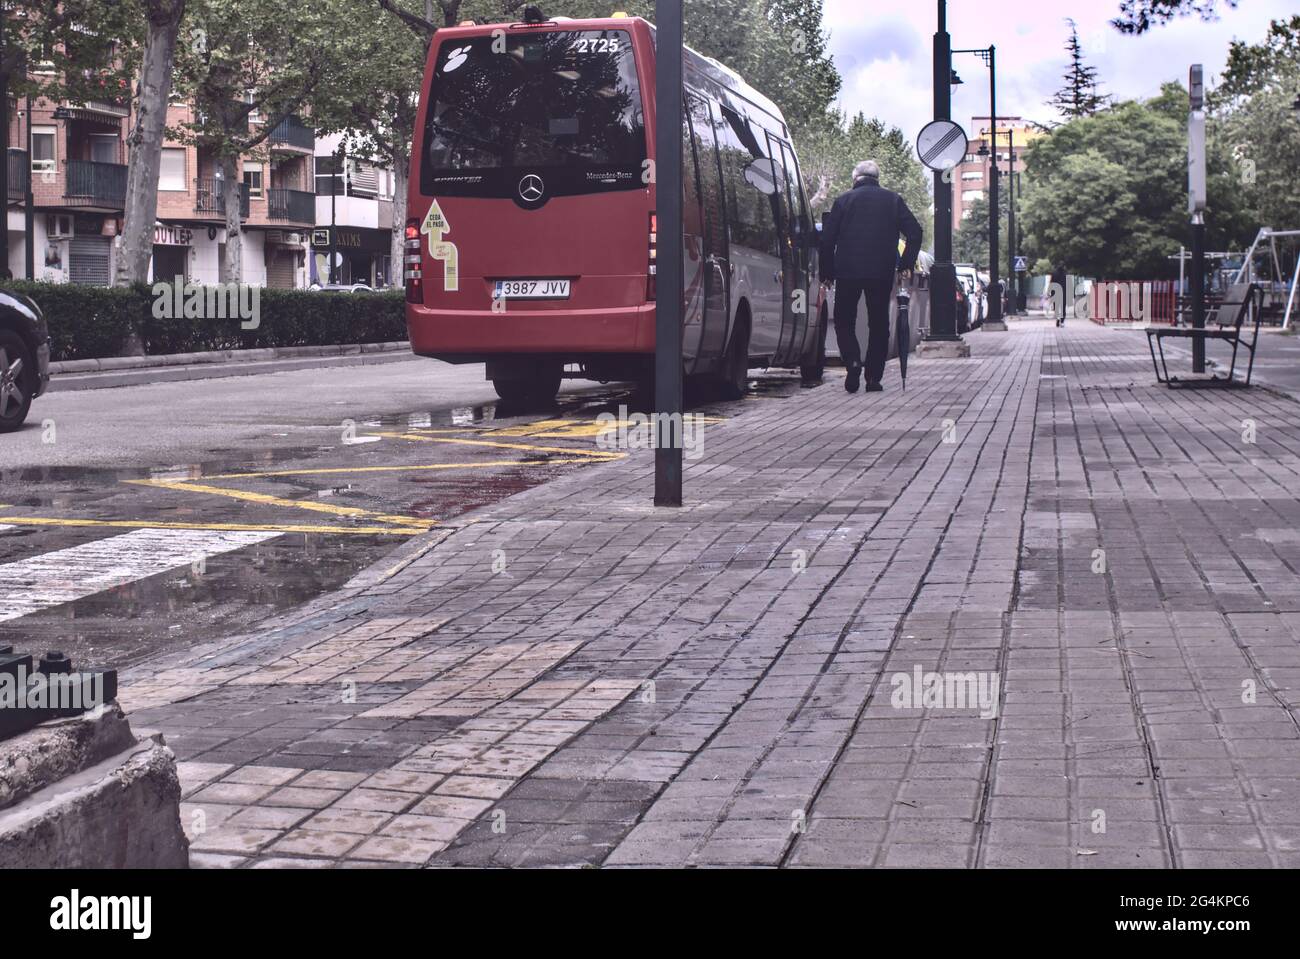 ALCOY, SPAIN - May 25, 2021: Alcoy, Alicante, Spain - April 2021. Elderly  man approaches Red bus stopped at the bus stop to get on Stock Photo - Alamy